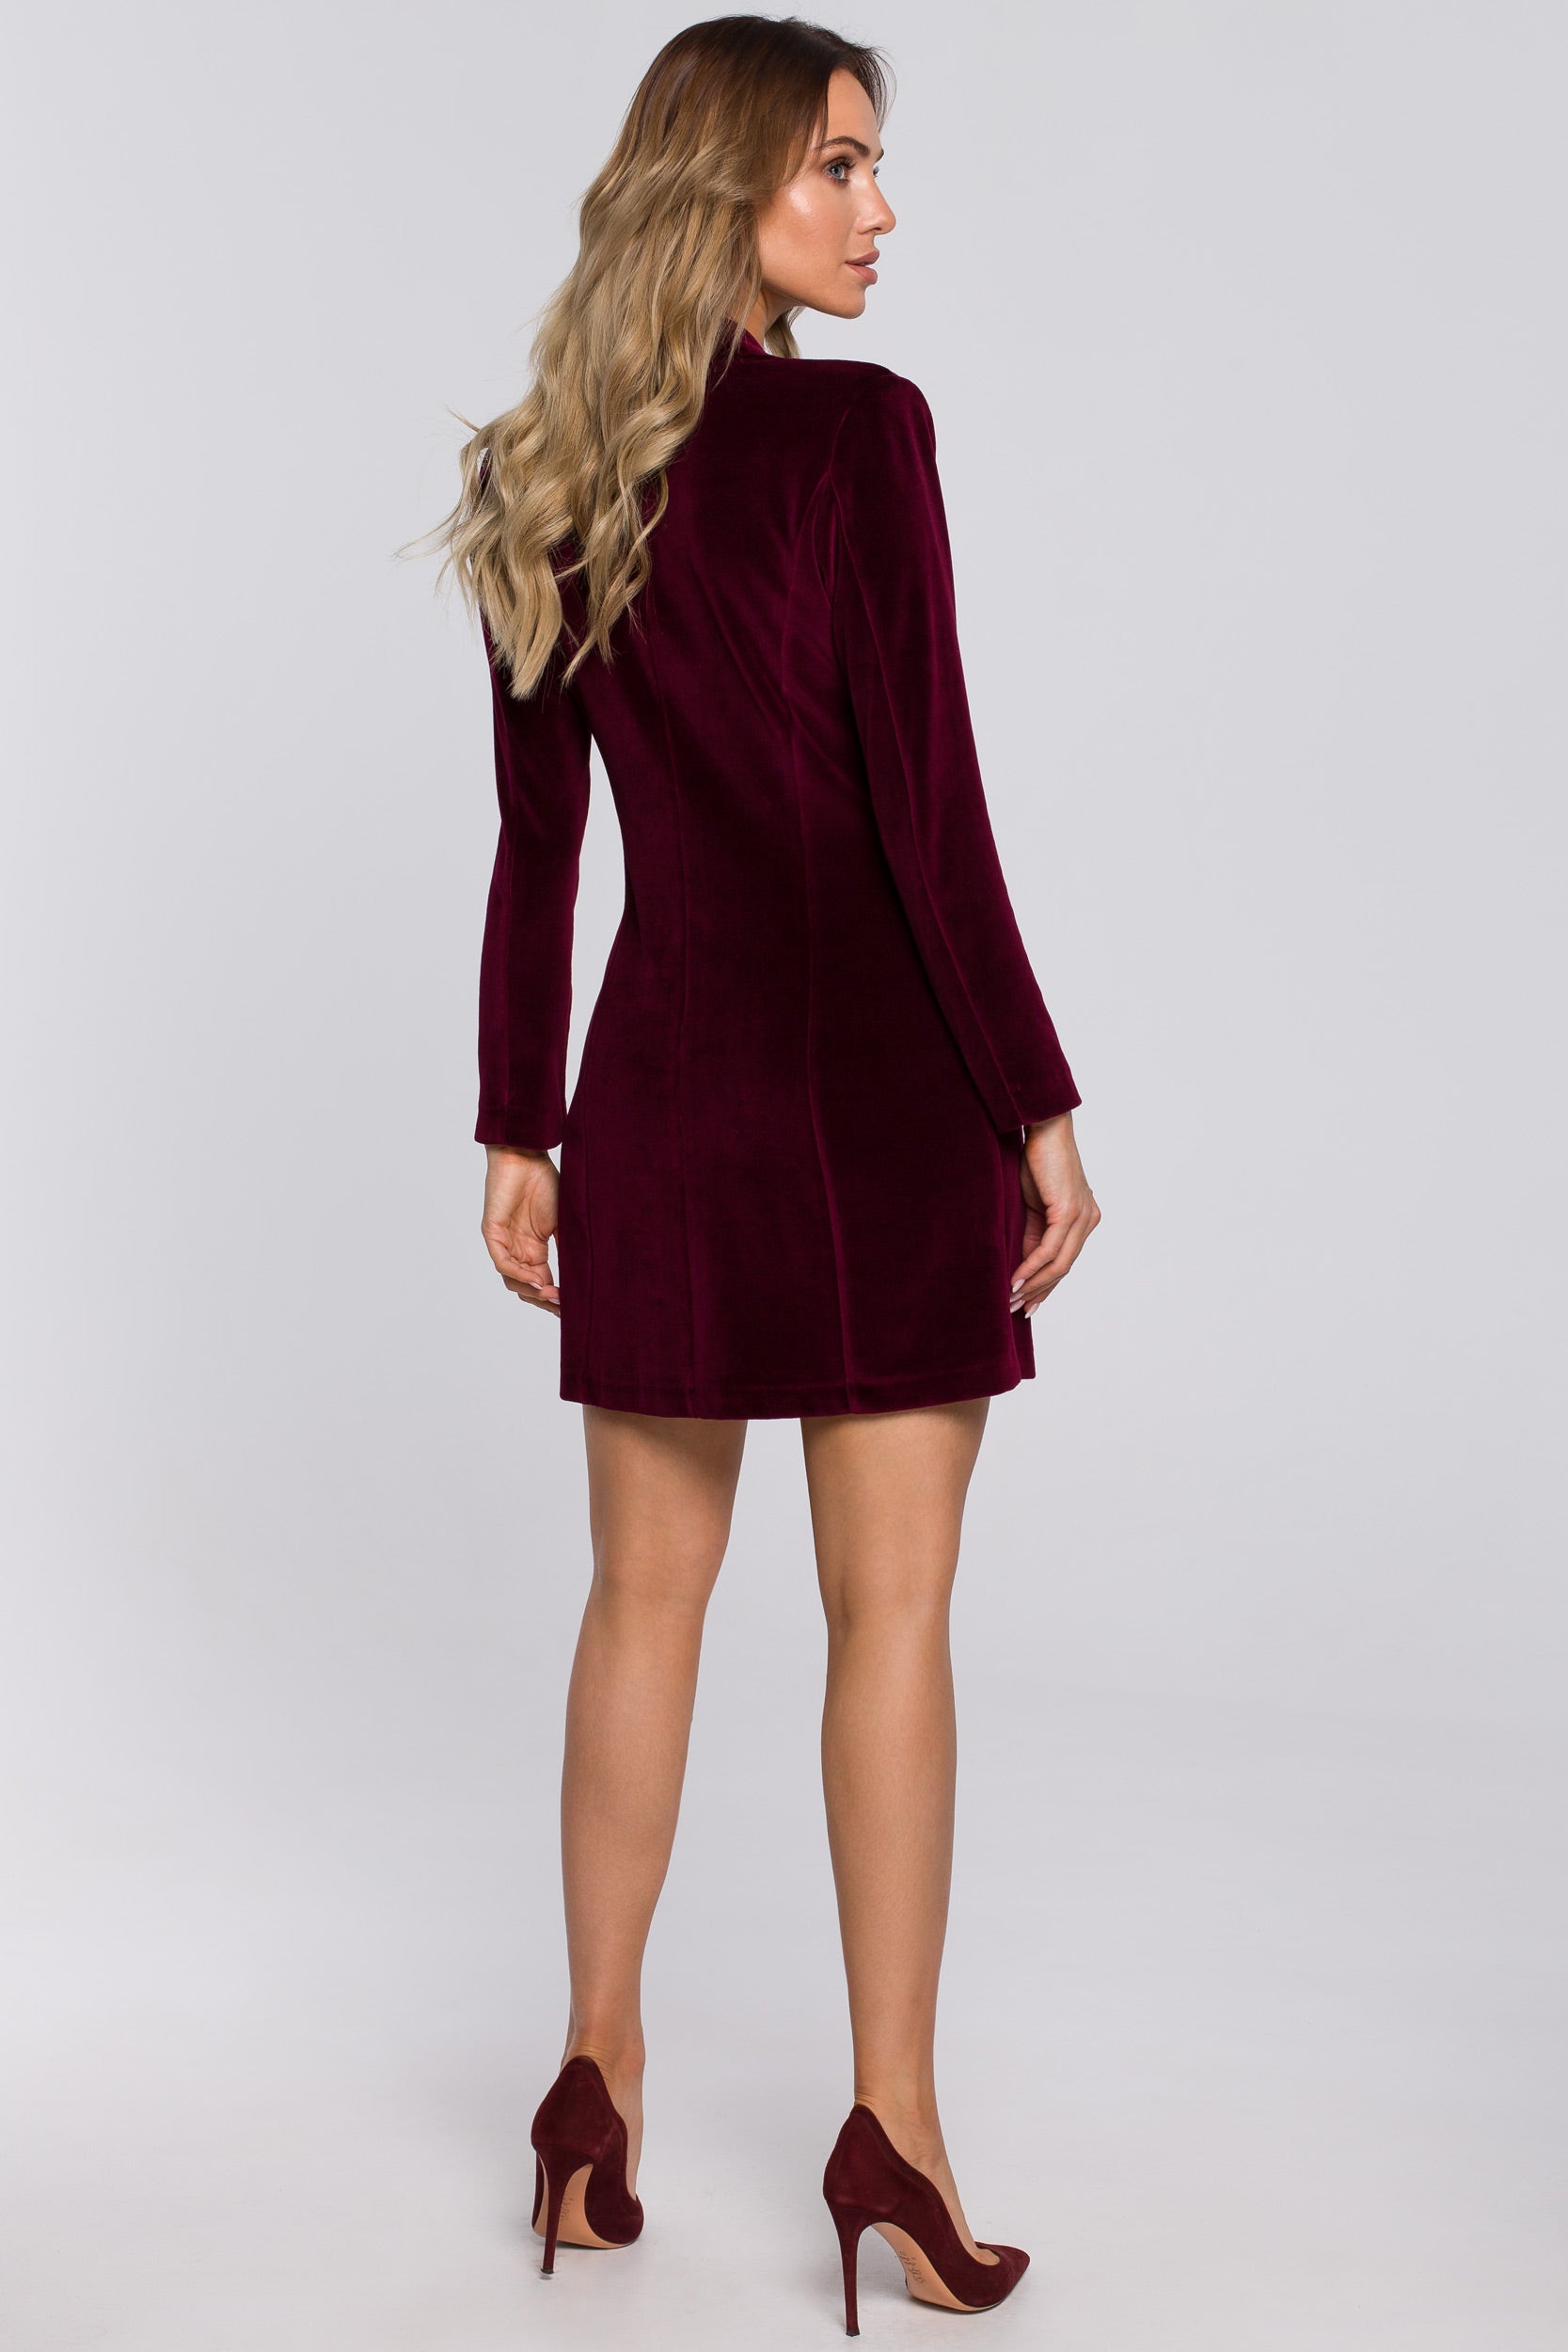 Elevate your style with our velvet mini dress. Featuring a V-neckline, long sleeves, and a single-button closure, this blazer dress is perfect for special occasions. Made from high-quality knit velvet fabric, it offers both comfort and opulence.